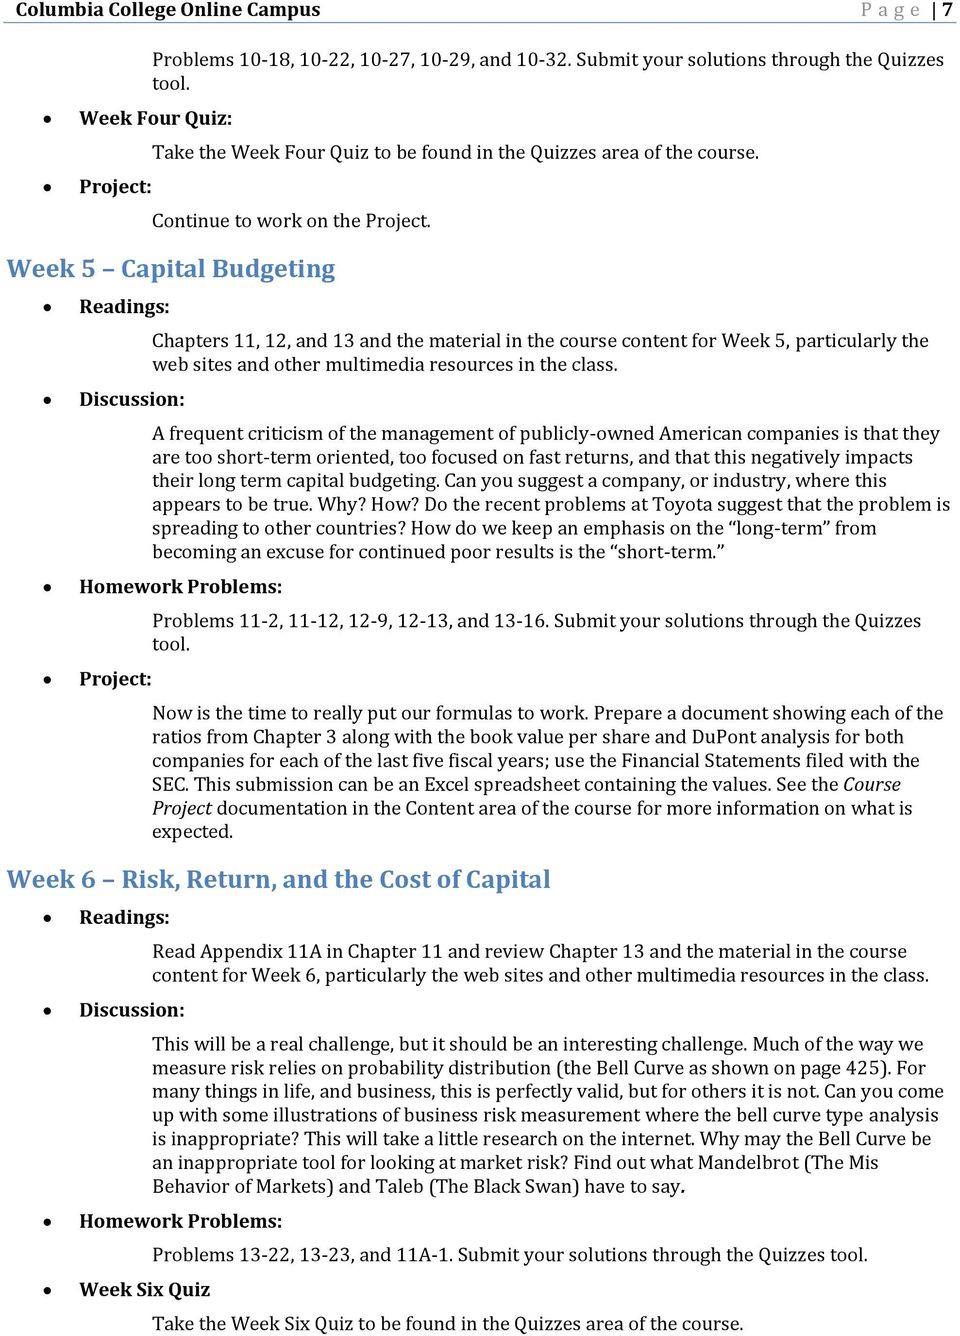 Week 5 Capital Budgeting Chapters 11, 12, and 13 and the material in the course content for Week 5, particularly the web sites and other multimedia resources in the class.